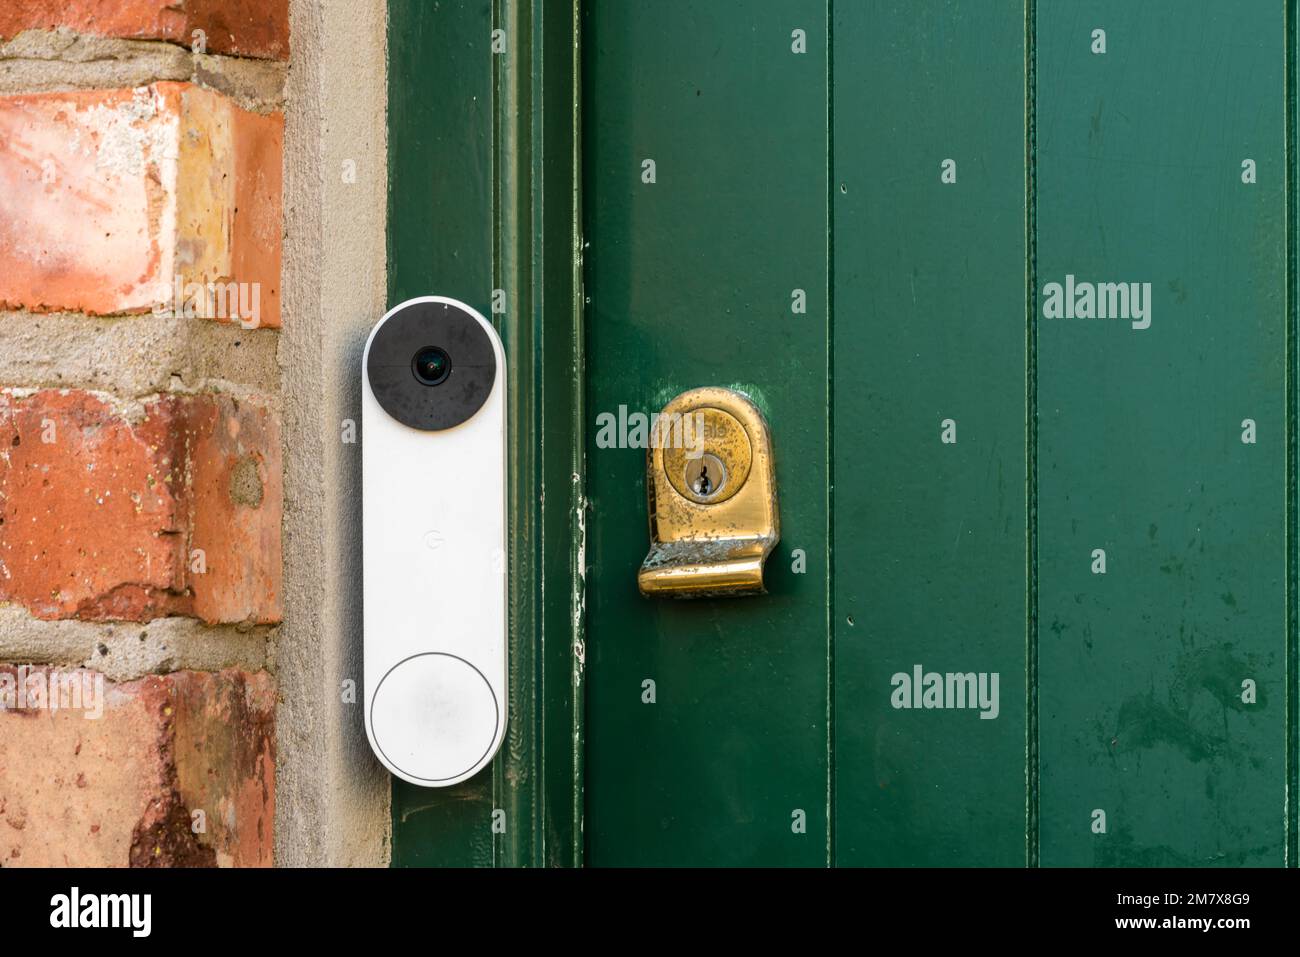 A video doorbell on a green door with a brass lock, United Kingdom, UK Stock Photo